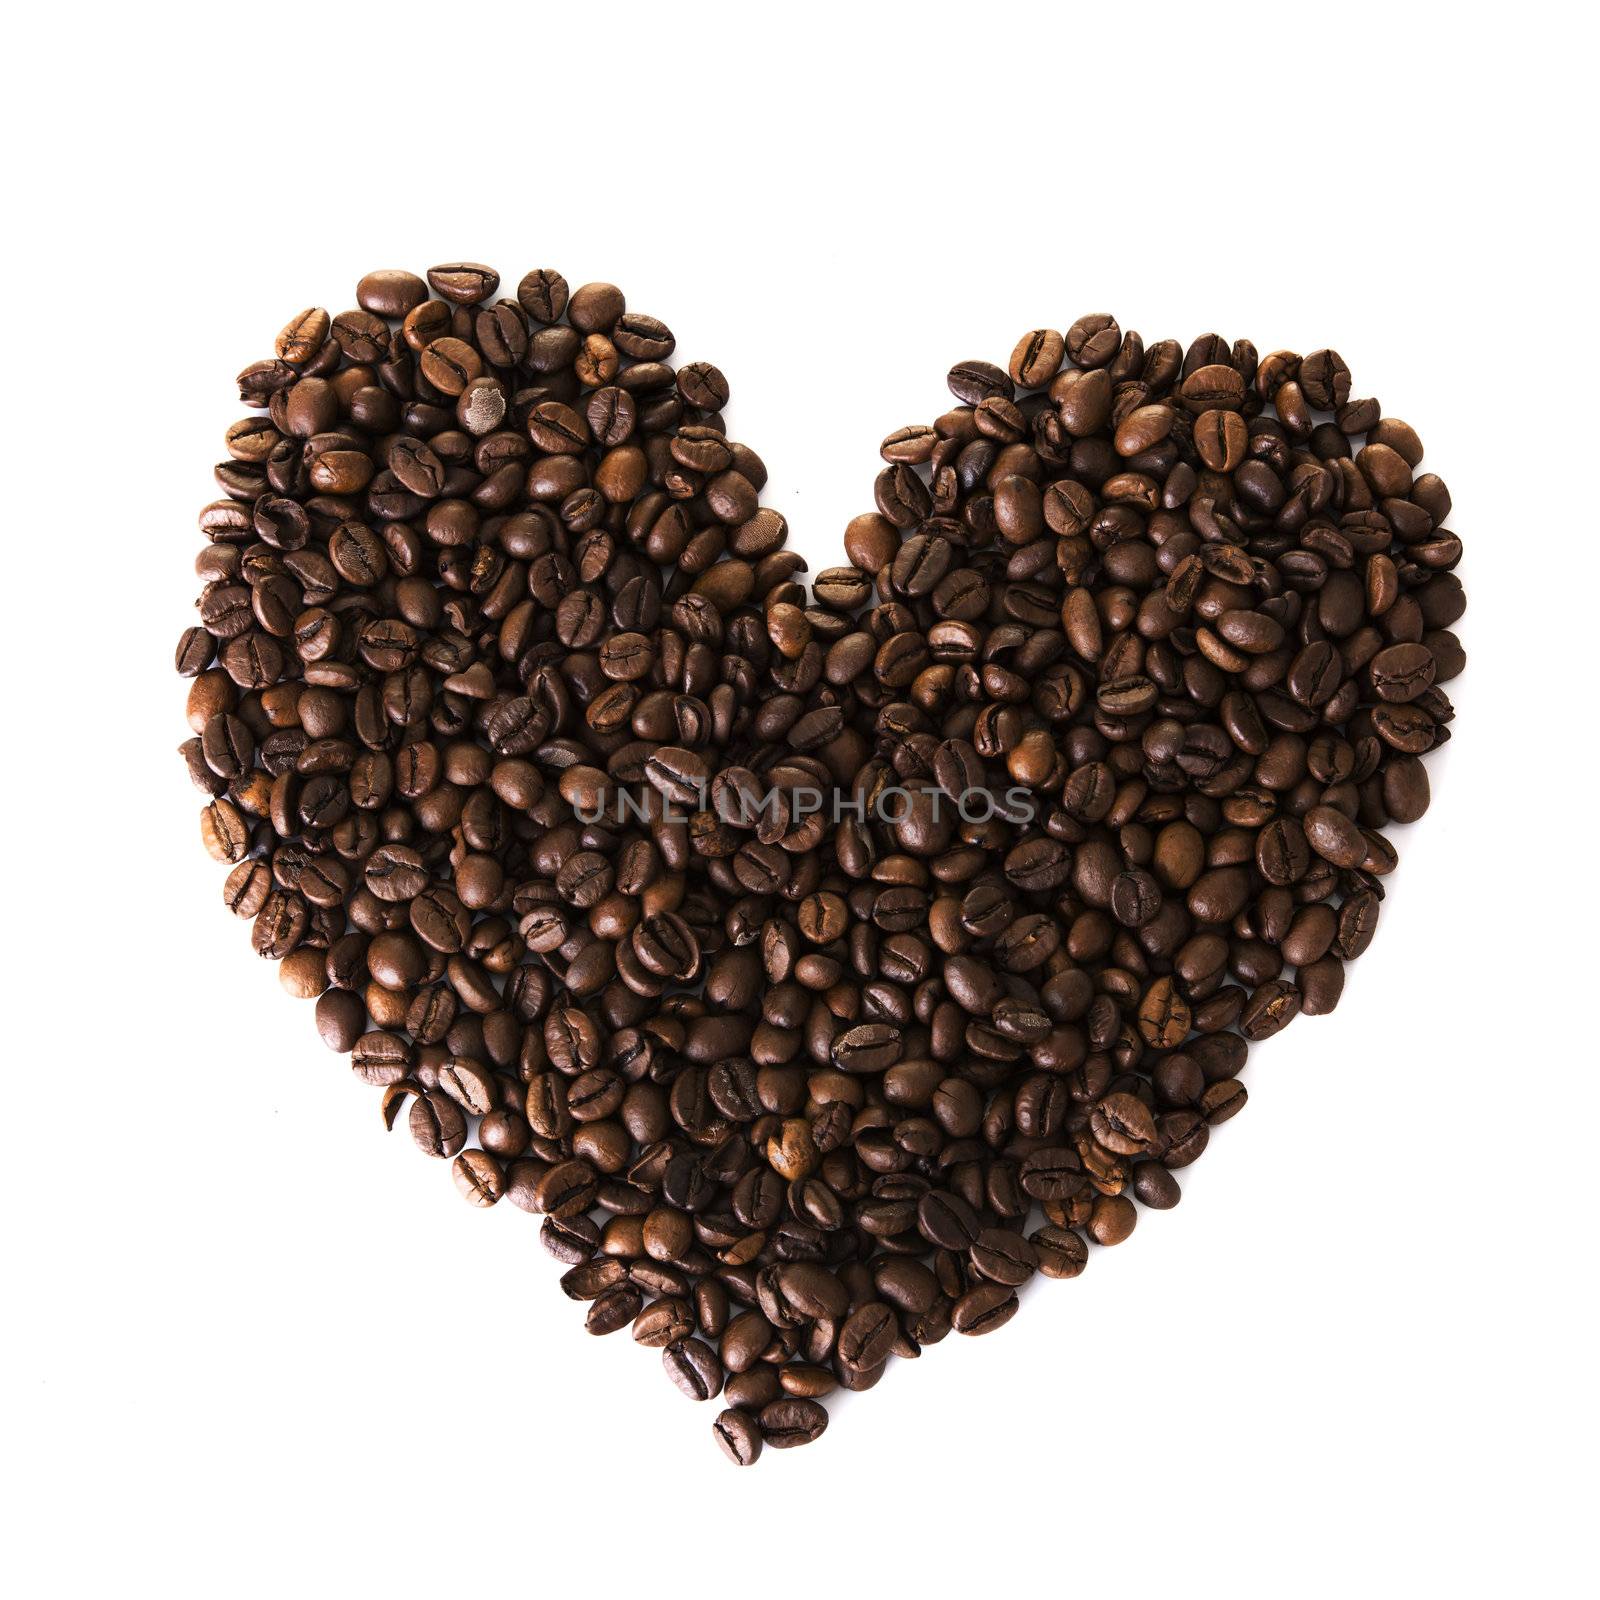 Heart from coffee beans isolated on a white background